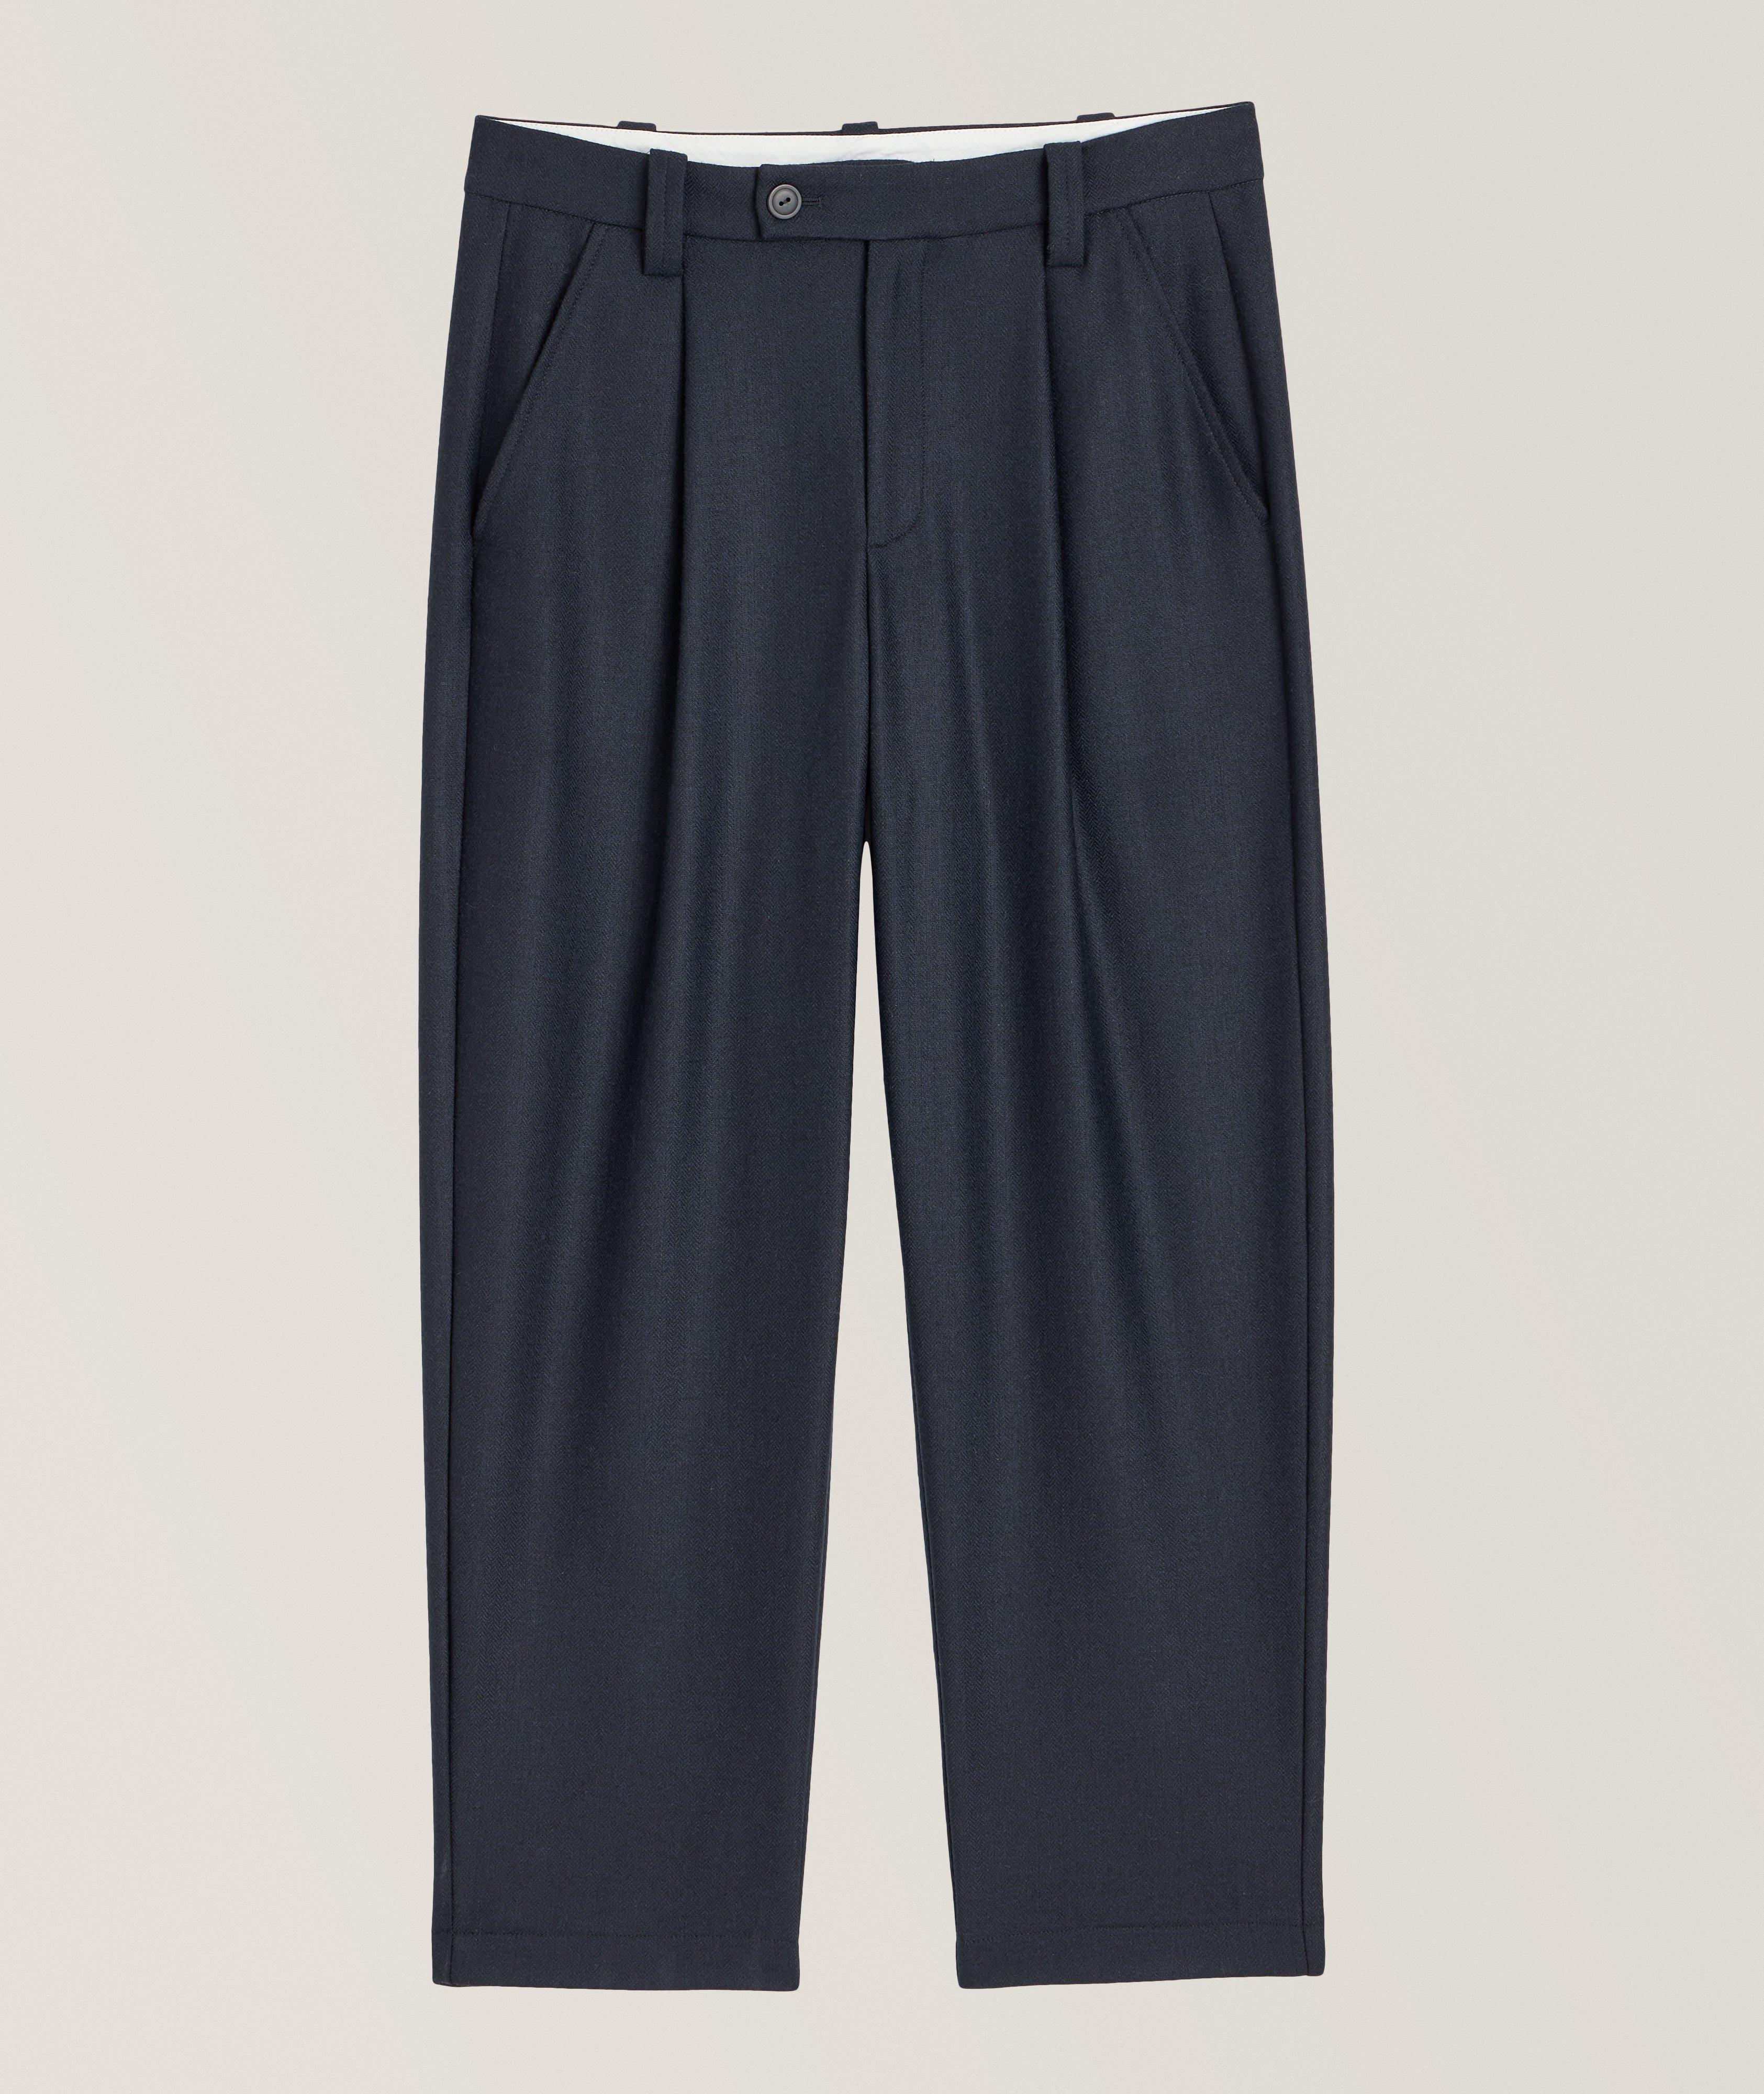 Renato Pleated Wool Trousers image 0